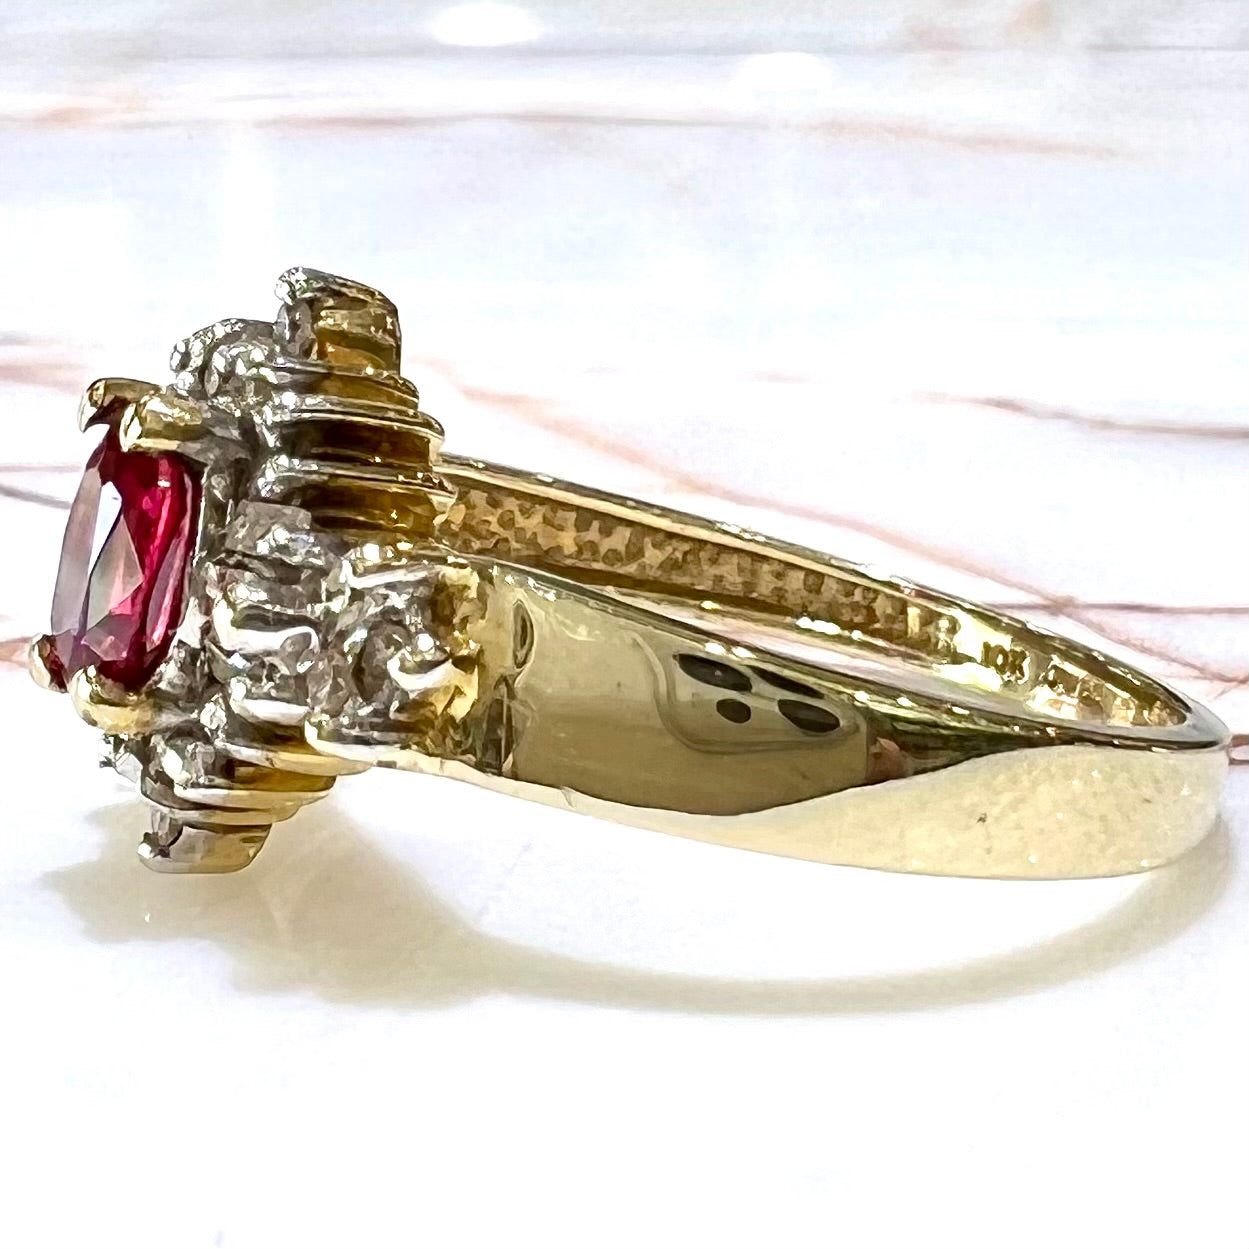 A yellow gold ring set with an oval cut red spinel and diamond rounds and baguettes.